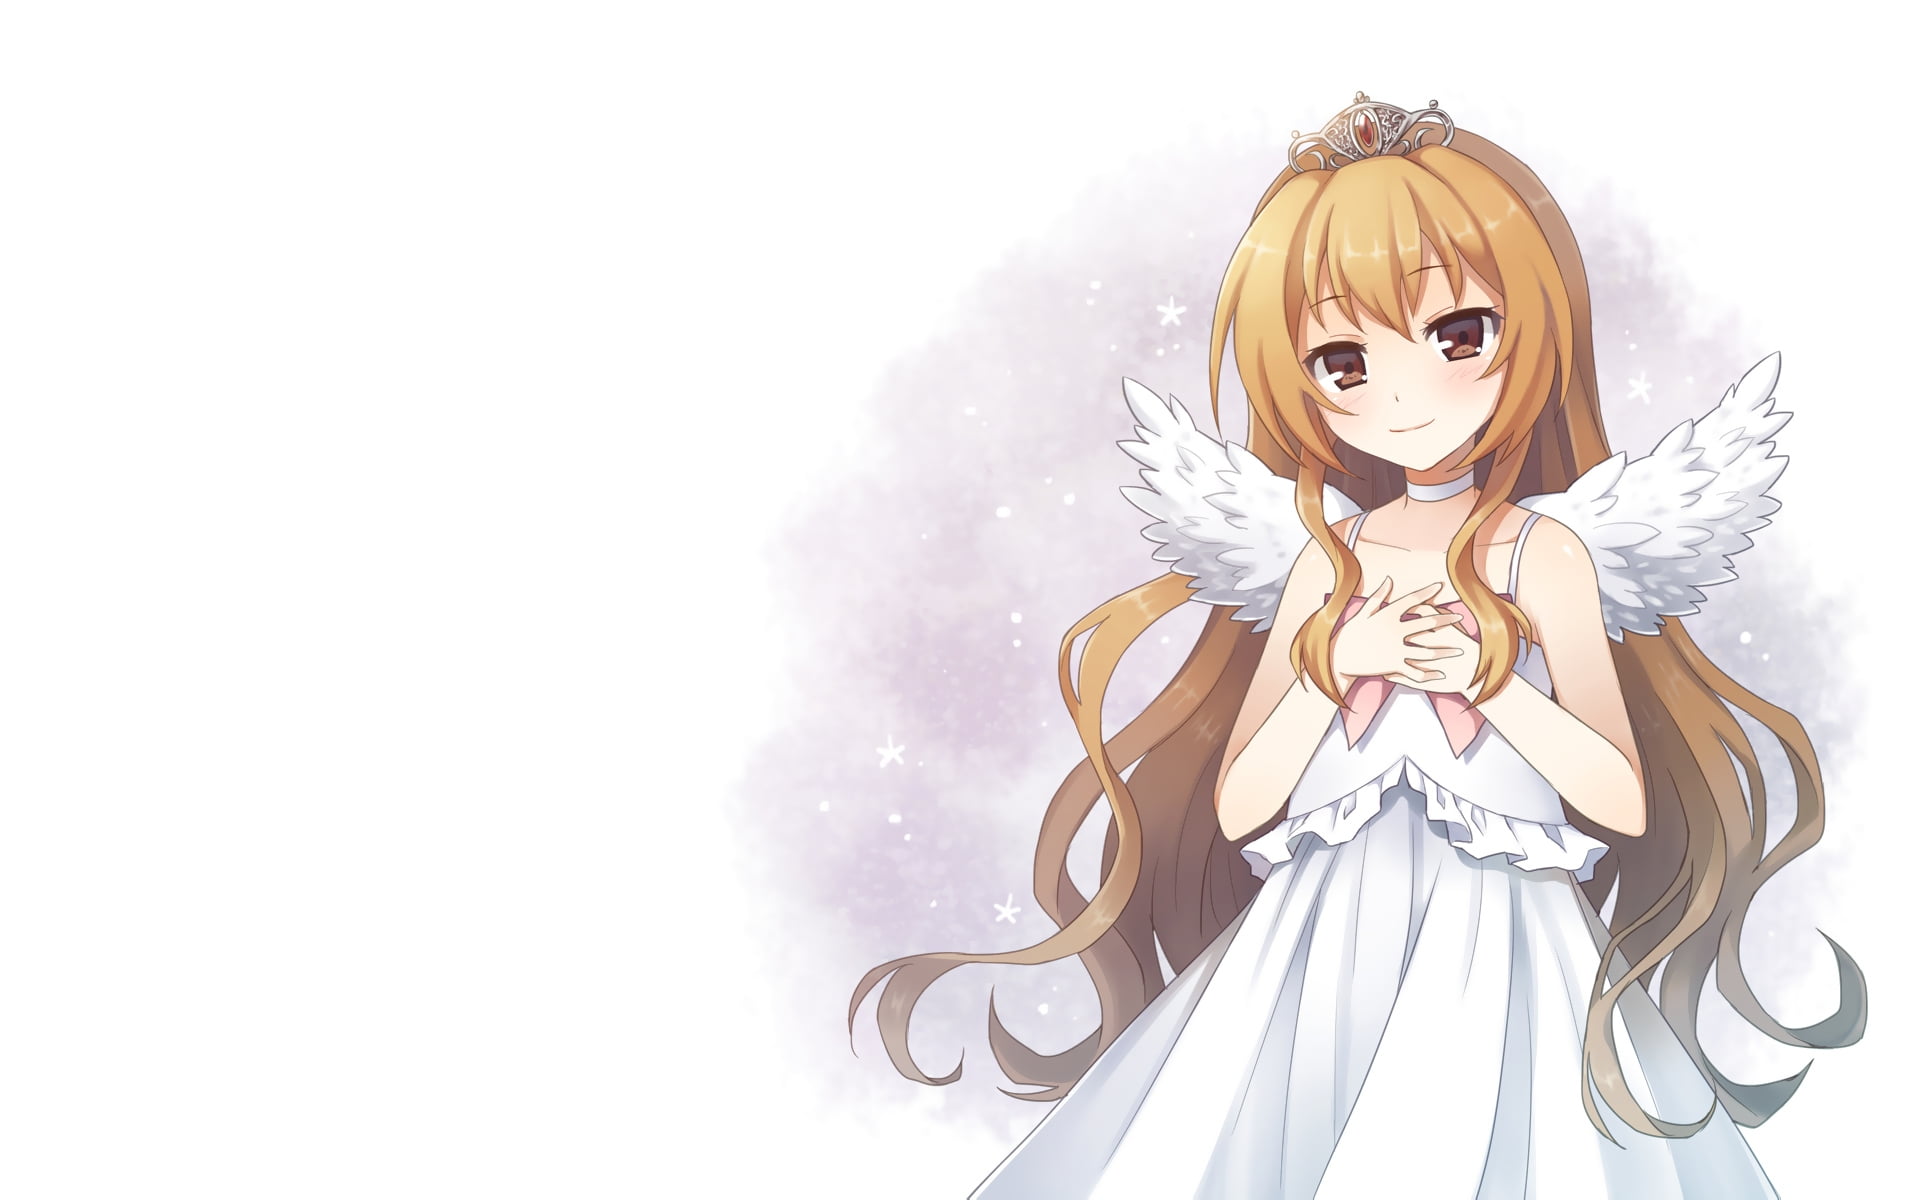 Angel anime character putting her hand on chest